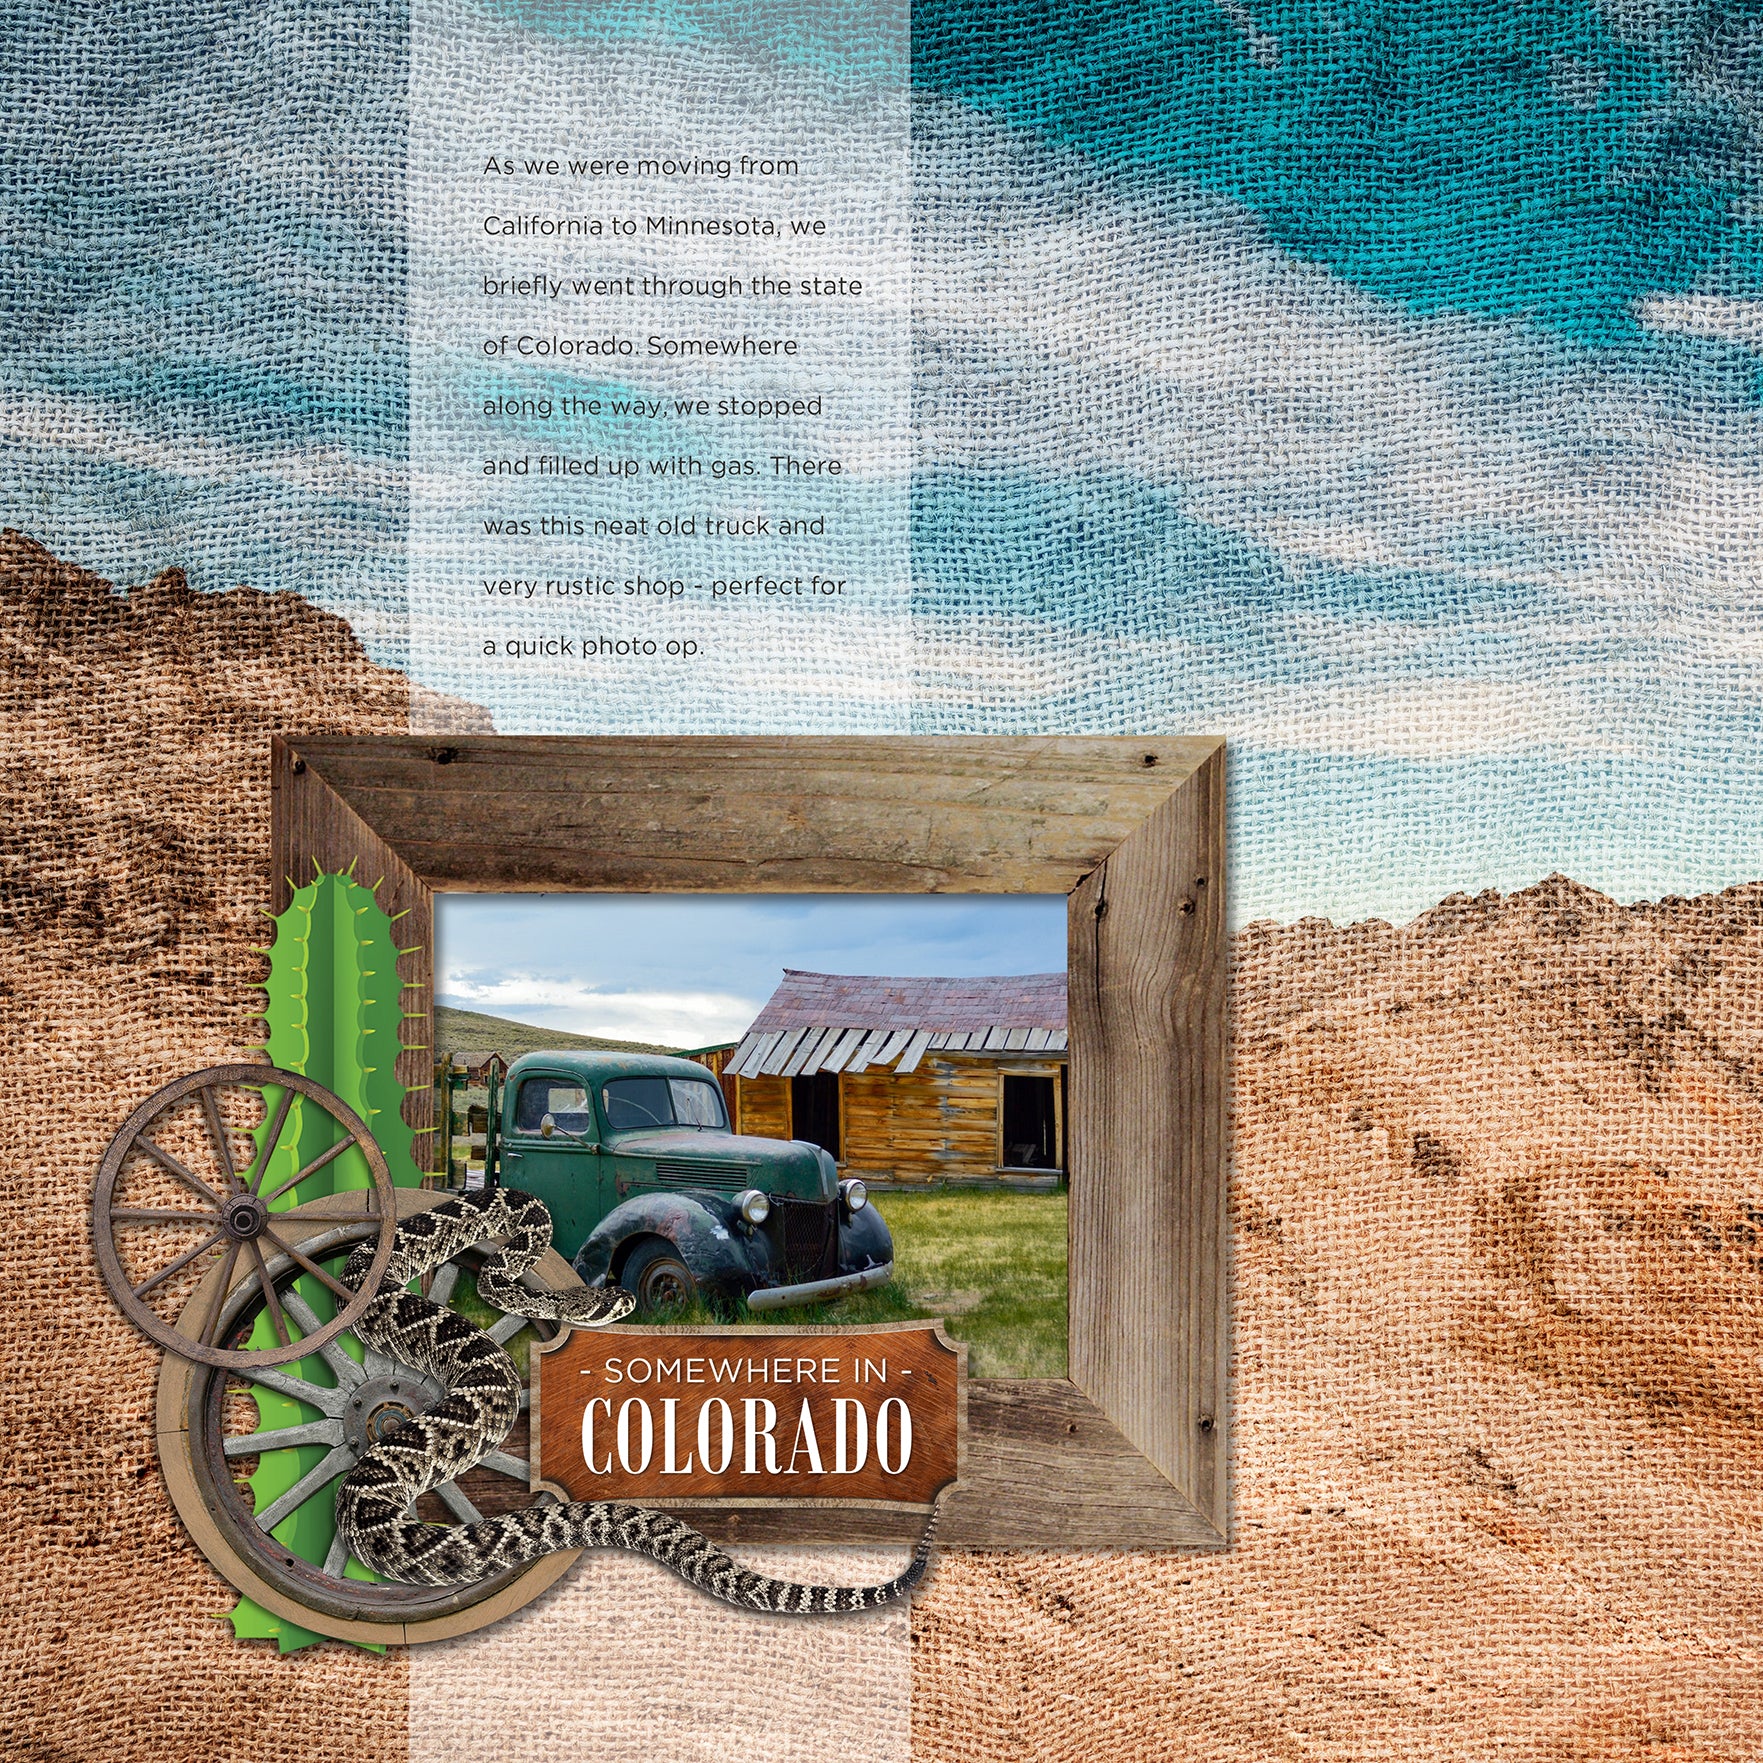 The Wild West Town Papers 2 Digital Scrapbook Kit features authentic western and desert landscapes accented by a burlap texture. Perfect for western-inspired backgrounds to your digital scrapbook pages including travels to the Southwest (Arizona, Colorado, Utah, Nevada, New Mexico), cowboy and cowgirl dances and hoedowns, rodeo and ranch events, ghost towns, vacations to the desert, Mexico, and so much more!